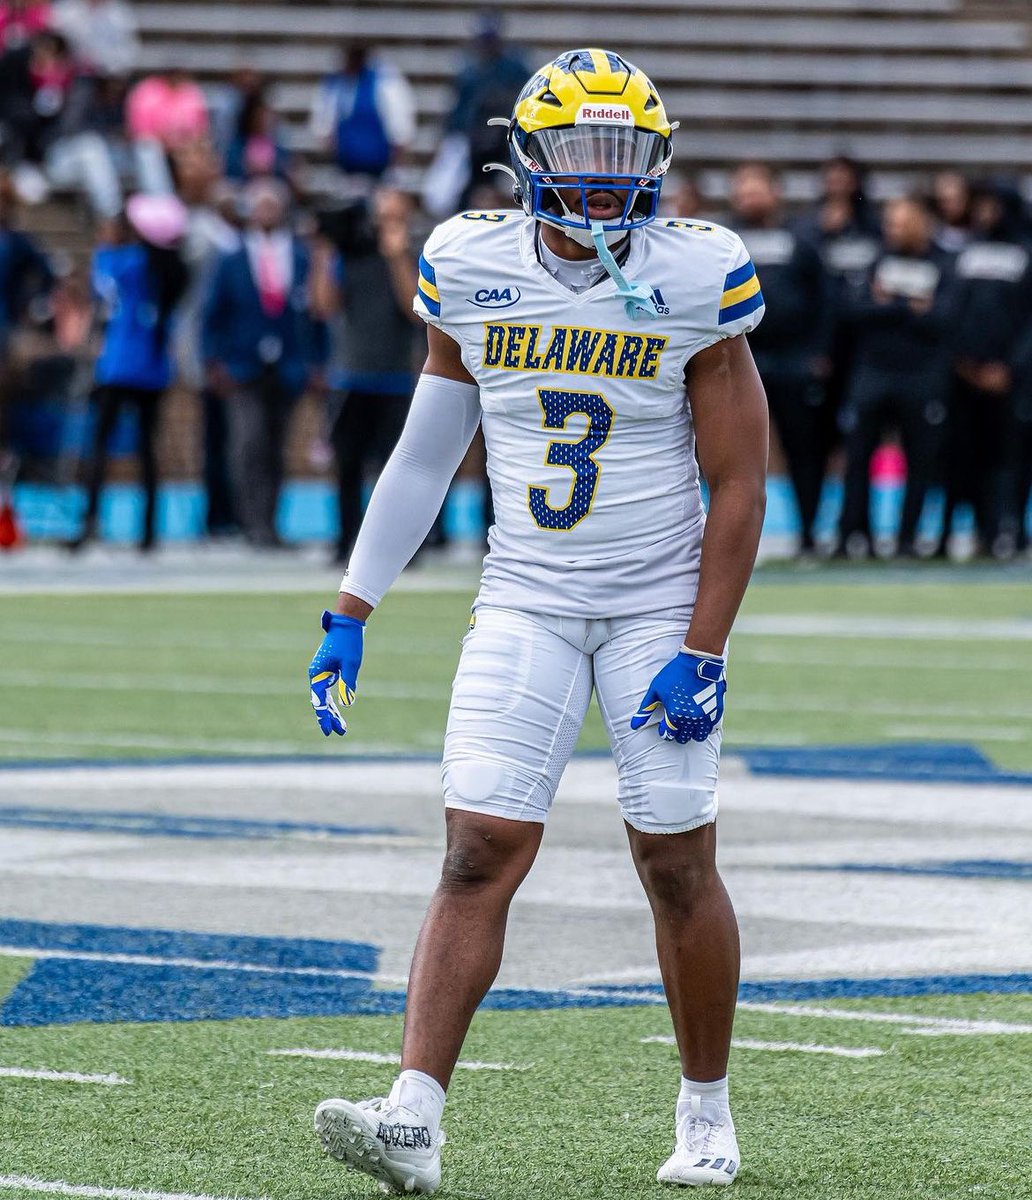 Blessed to receive an offer from Delaware!!